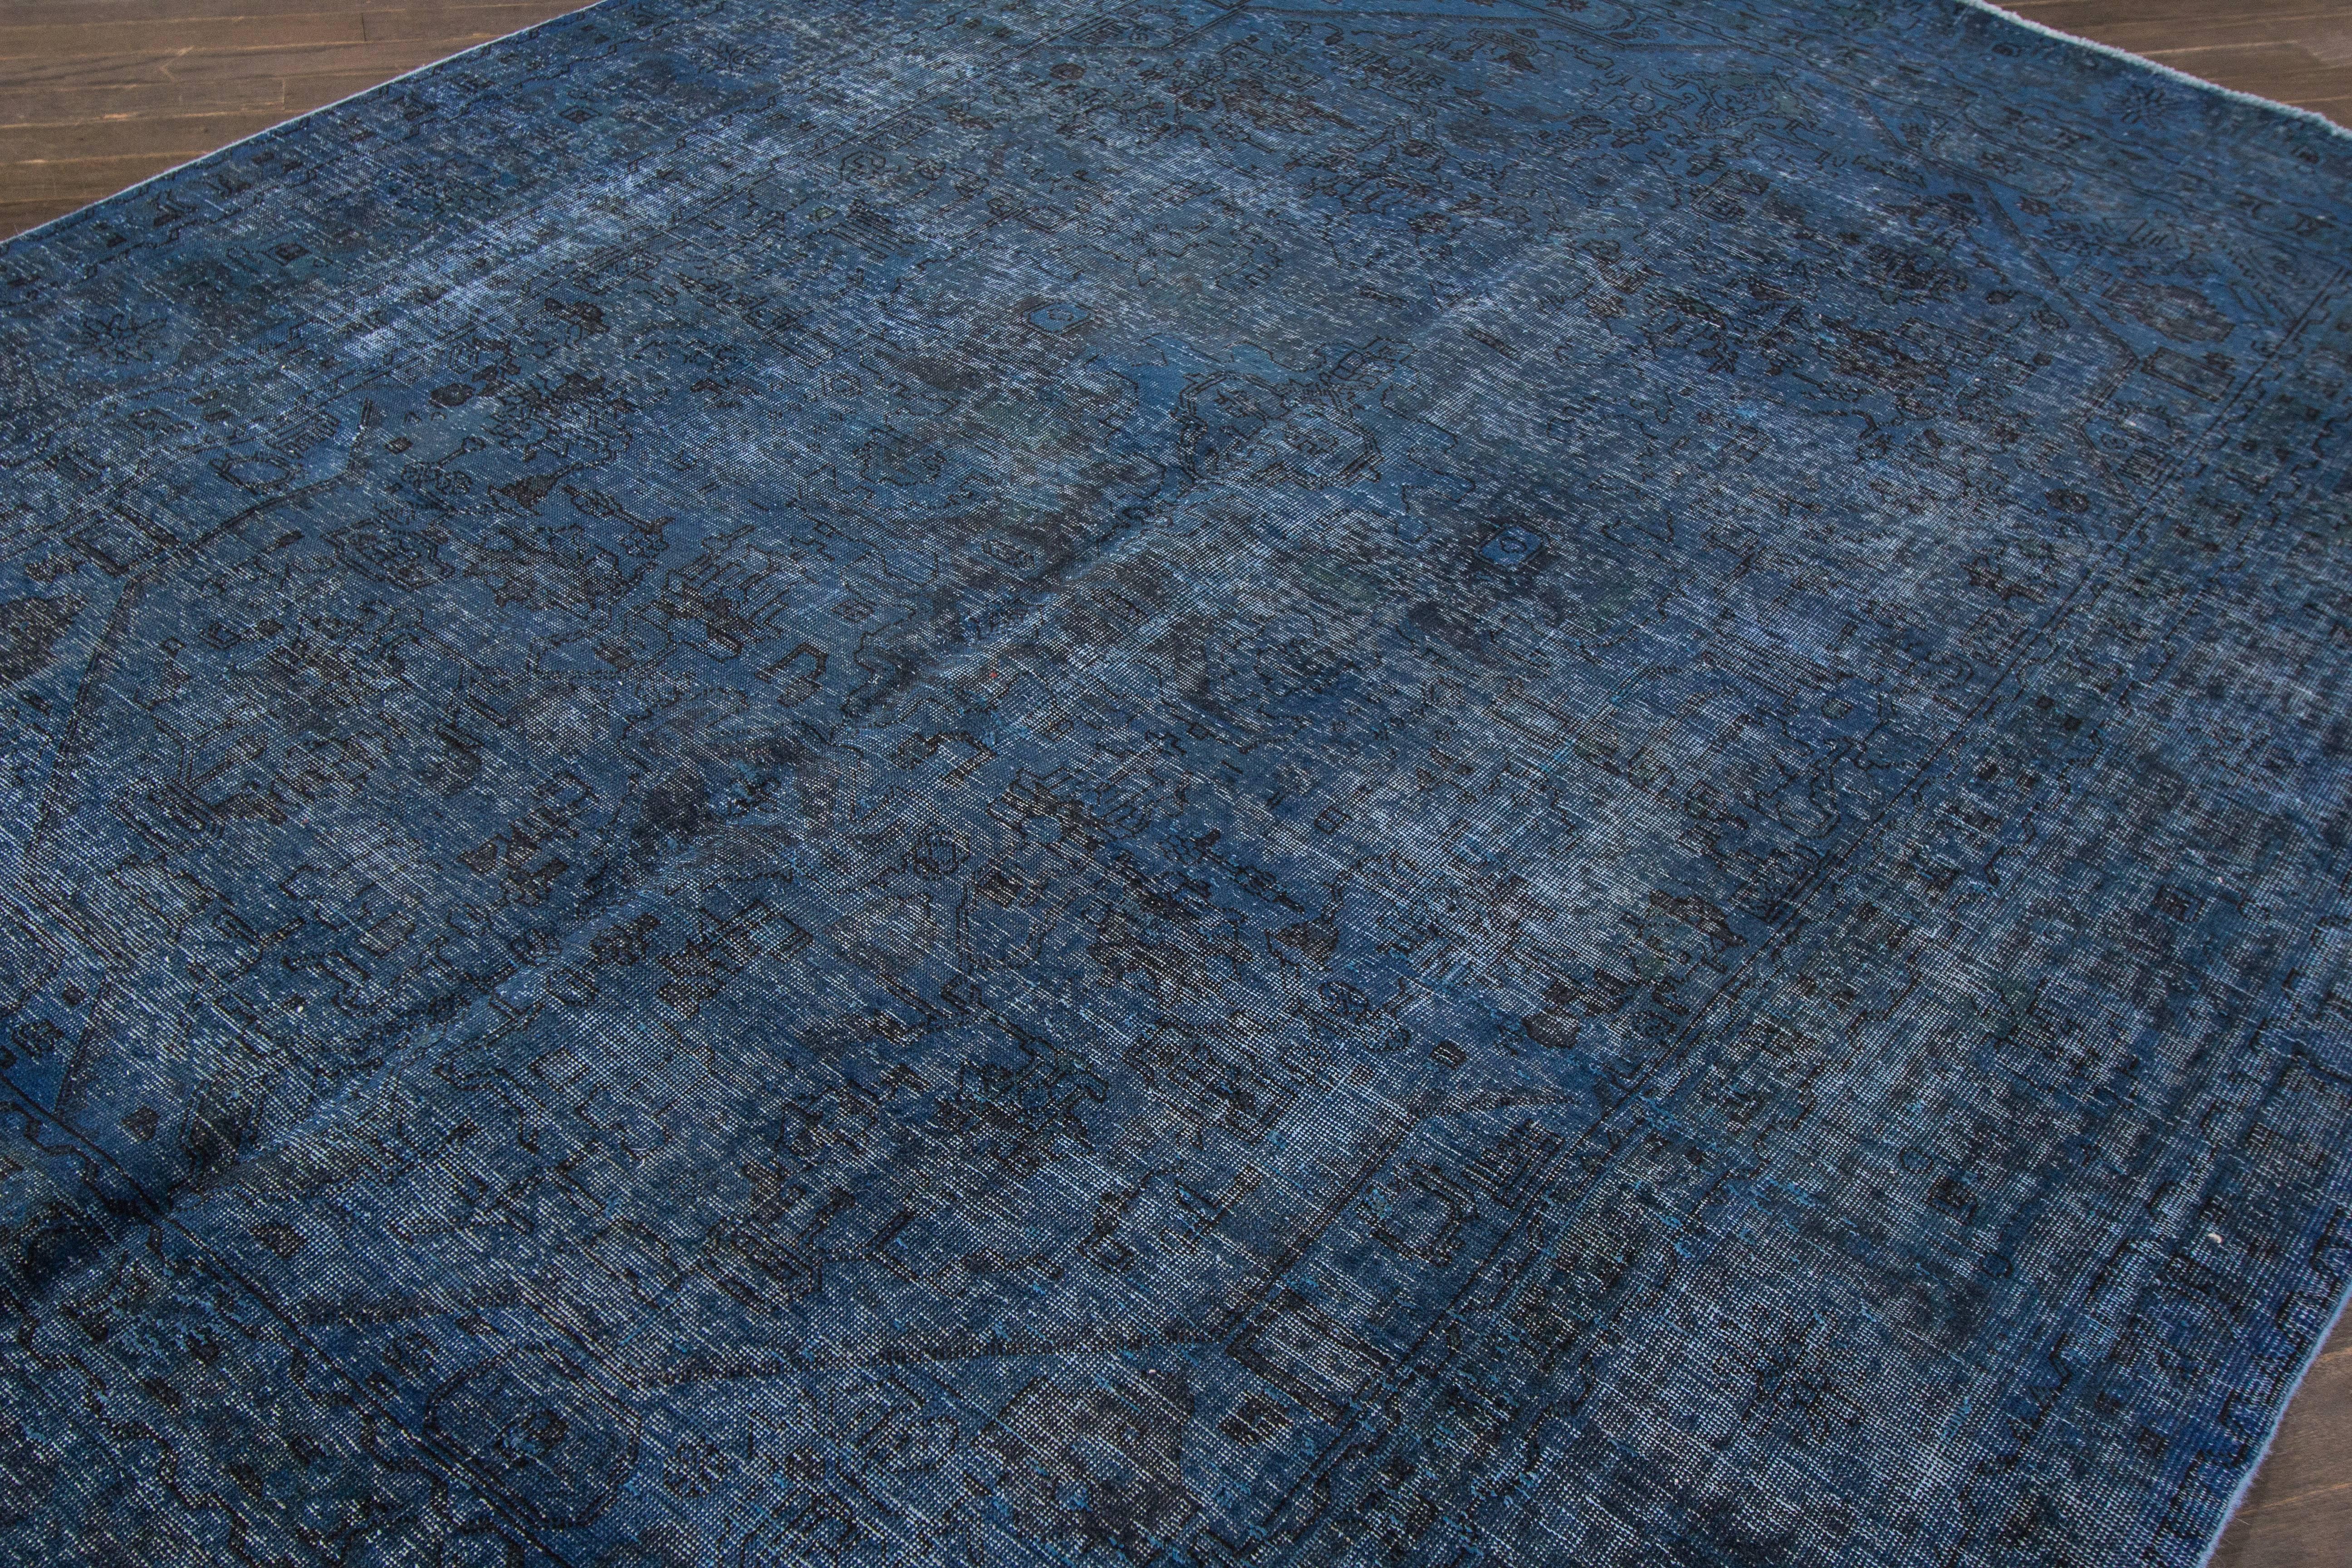 Color pattern and an intimate patina, this vintage Persian overdyed rug has it all. This is an absolutely stunning and impeccably handmade Persian rug. With its distressed composition, luxurious blend of modernism and color, this vintage overdyed